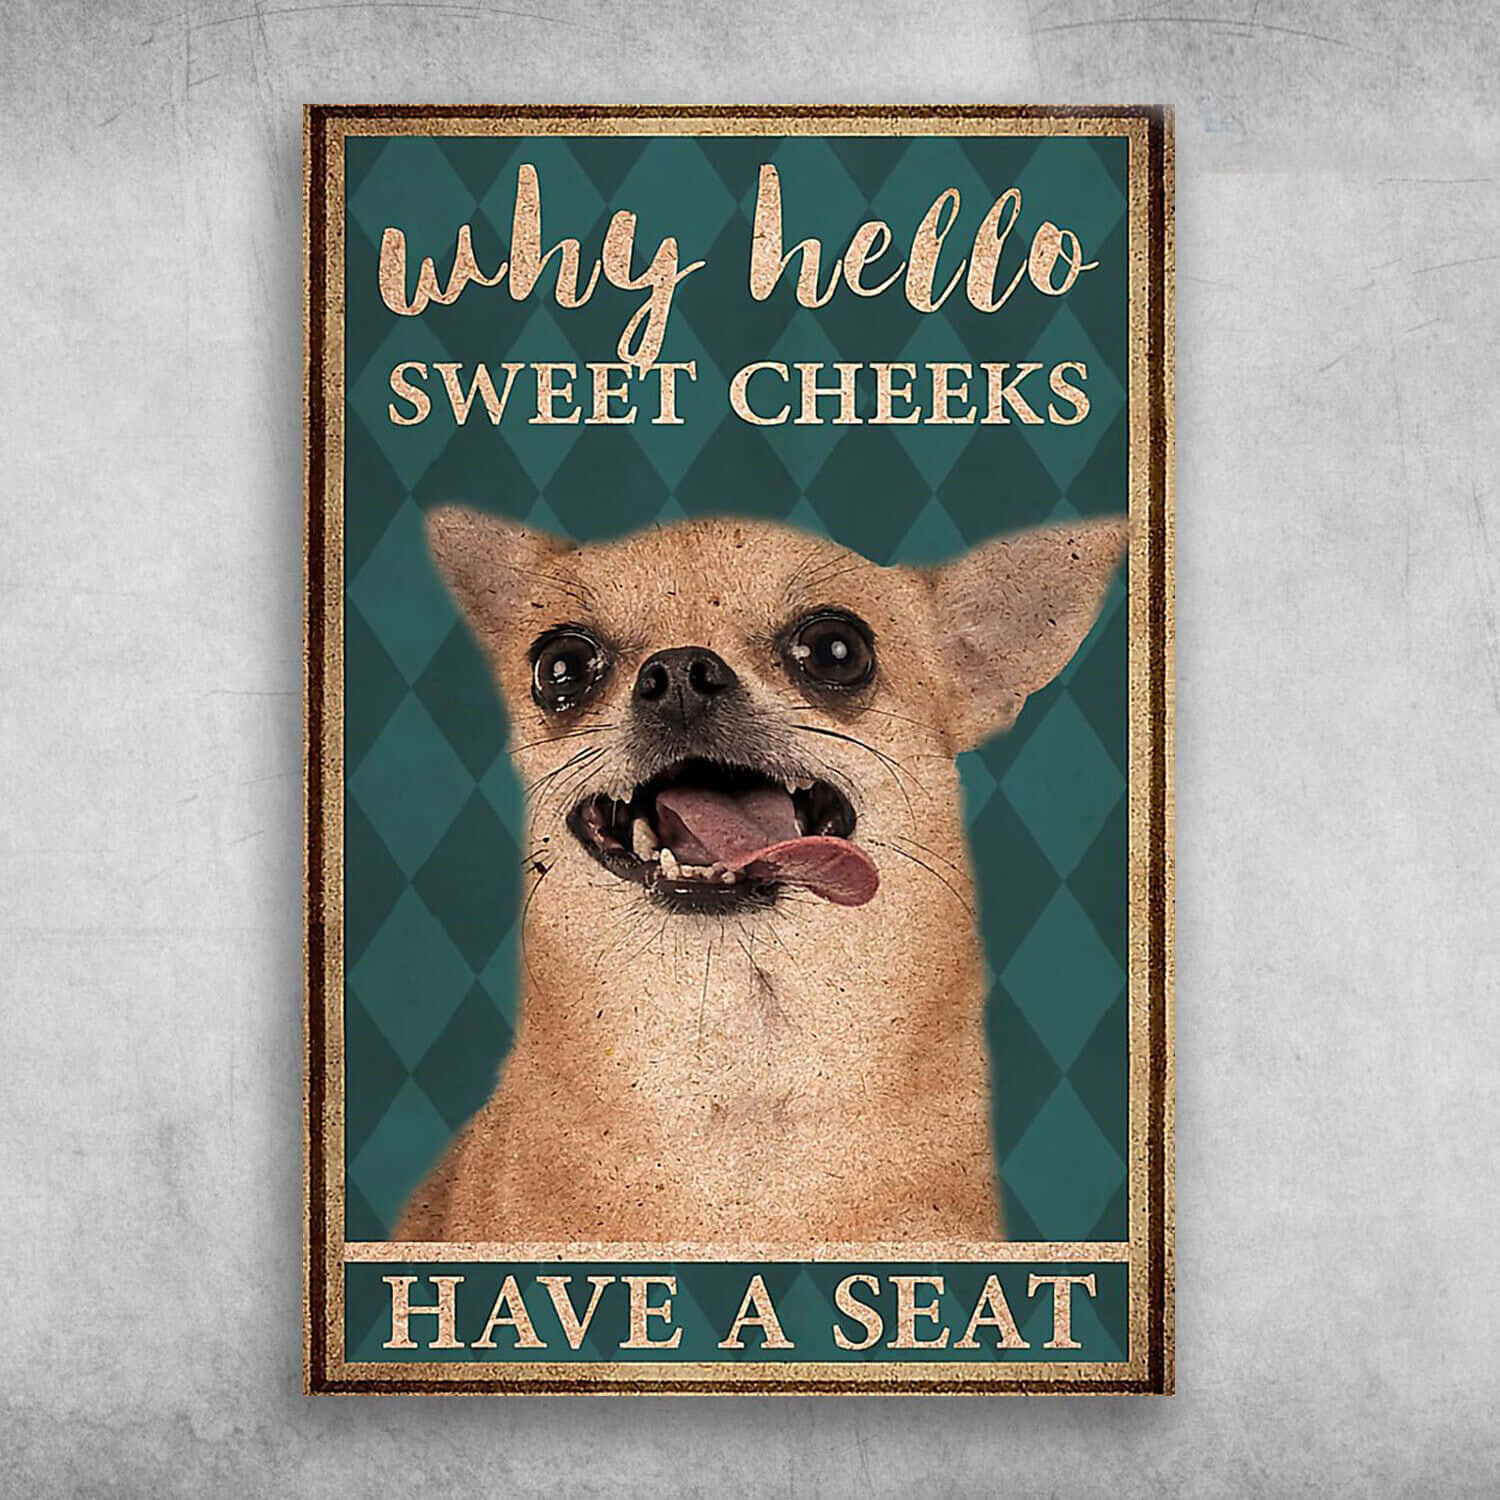 Funny Chihuahua Book Cover Pictures